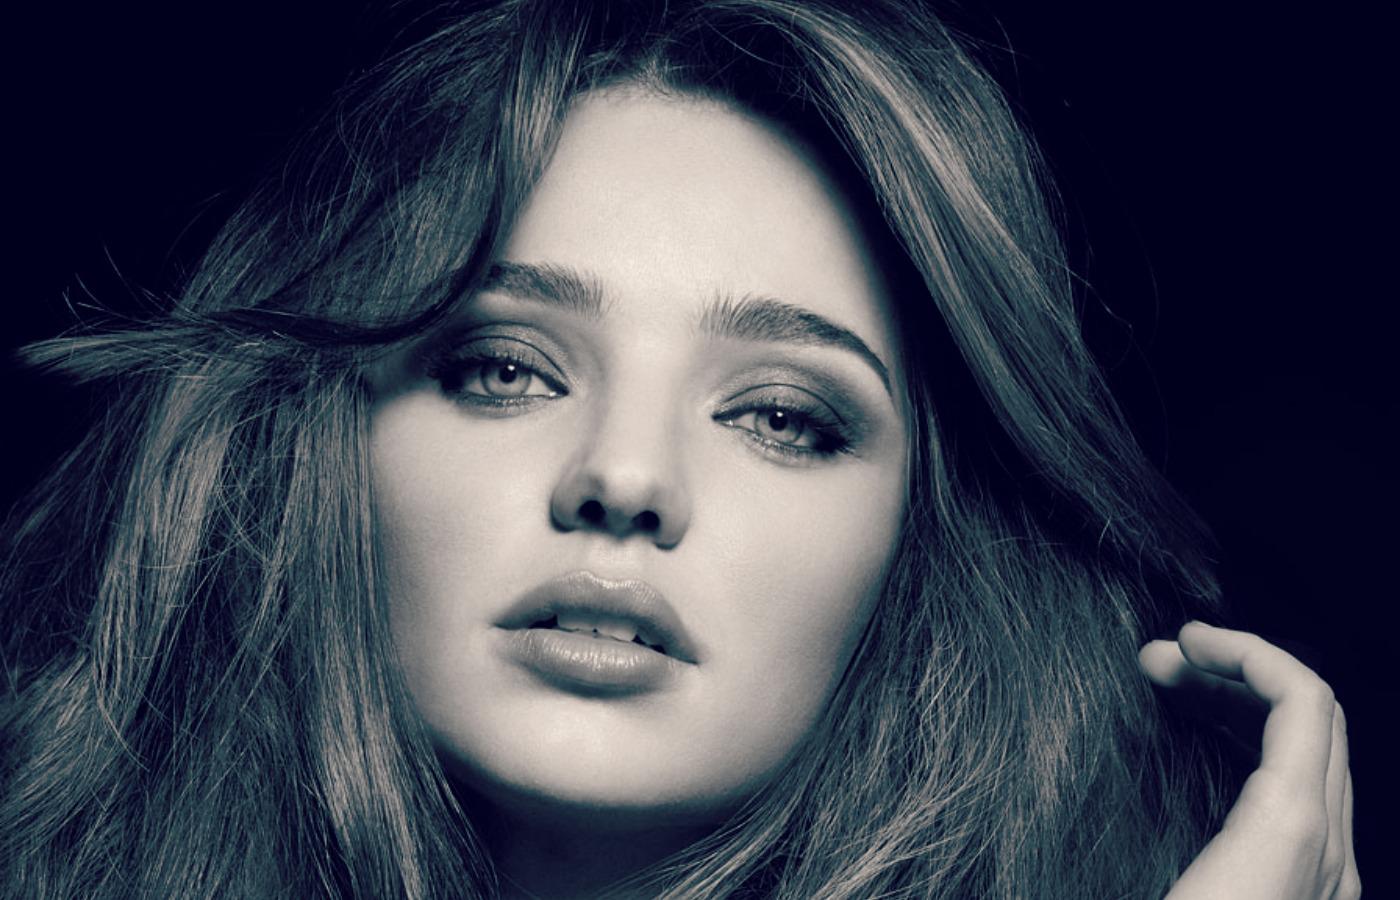 Miranda kerr - - High Quality and Resolution Wallpapers